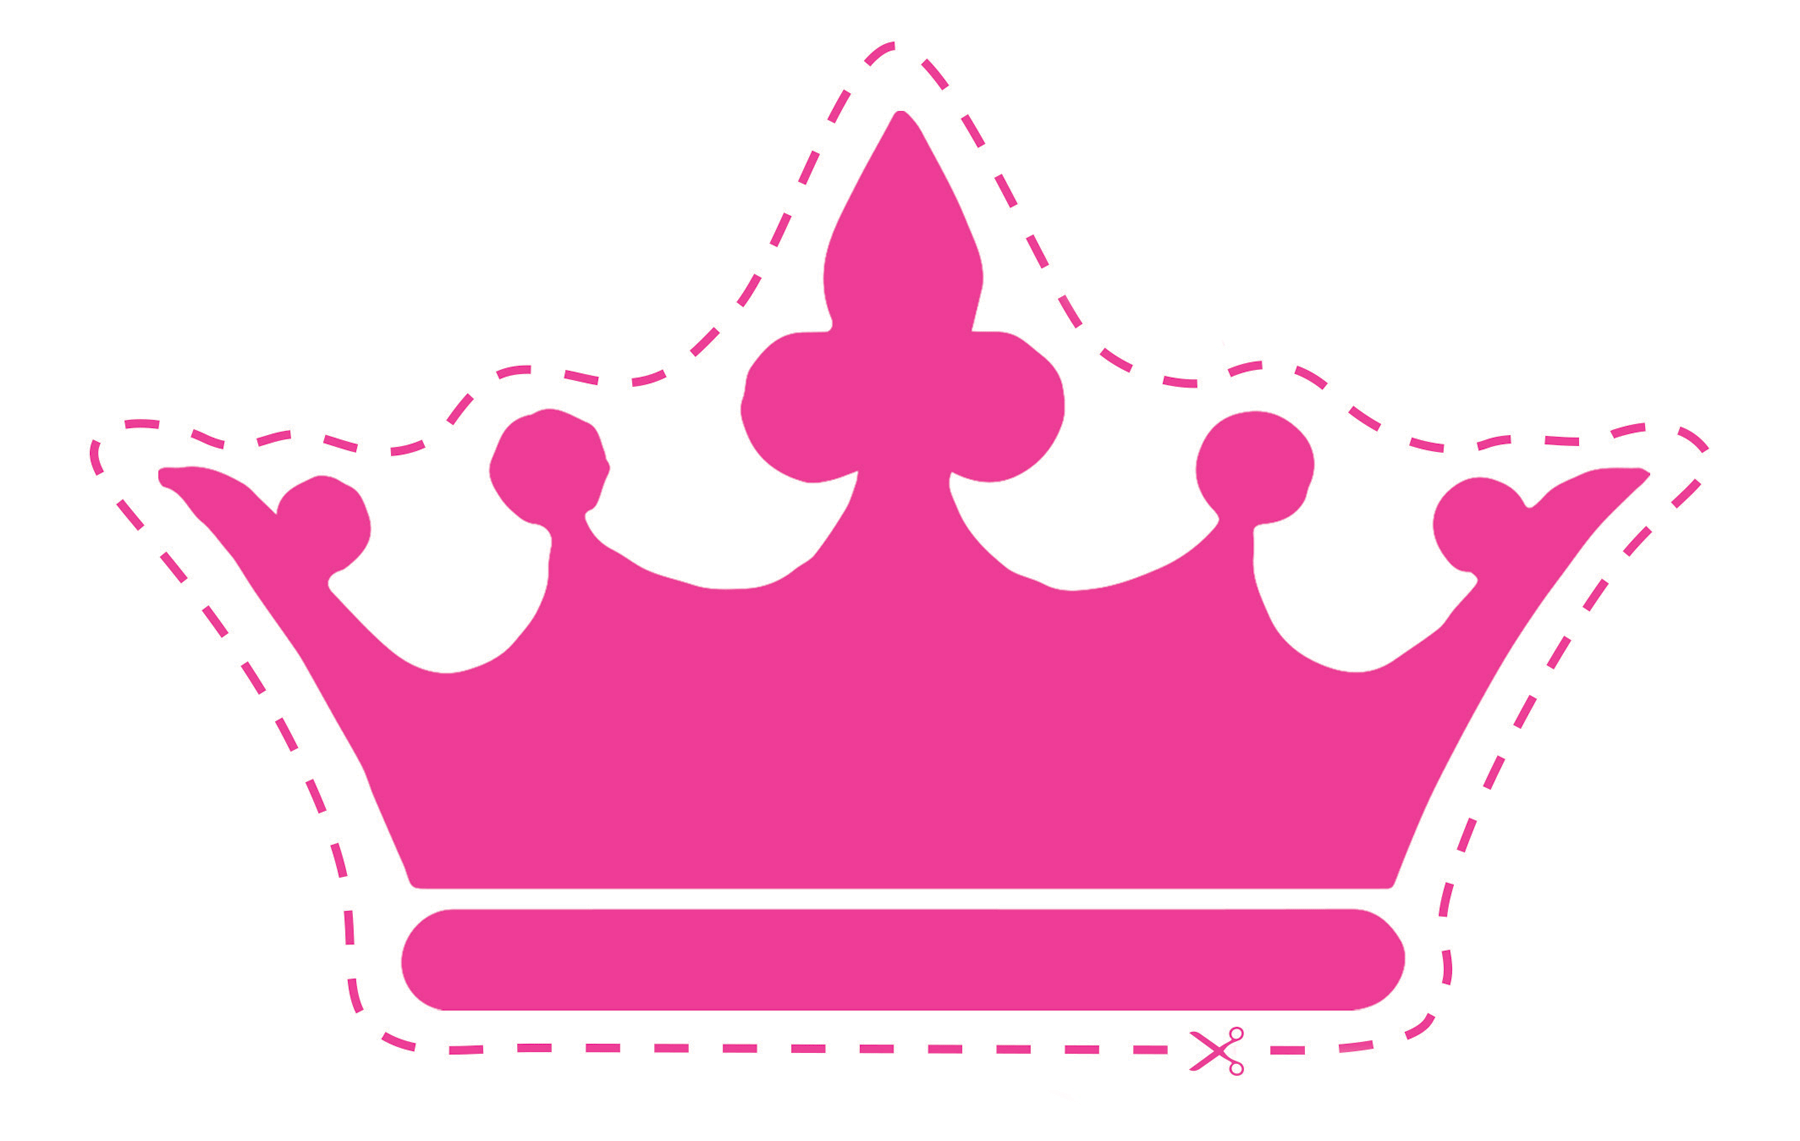 10 Best Images of Cut Out Crowns And Tiaras - Queen Crown Template ...